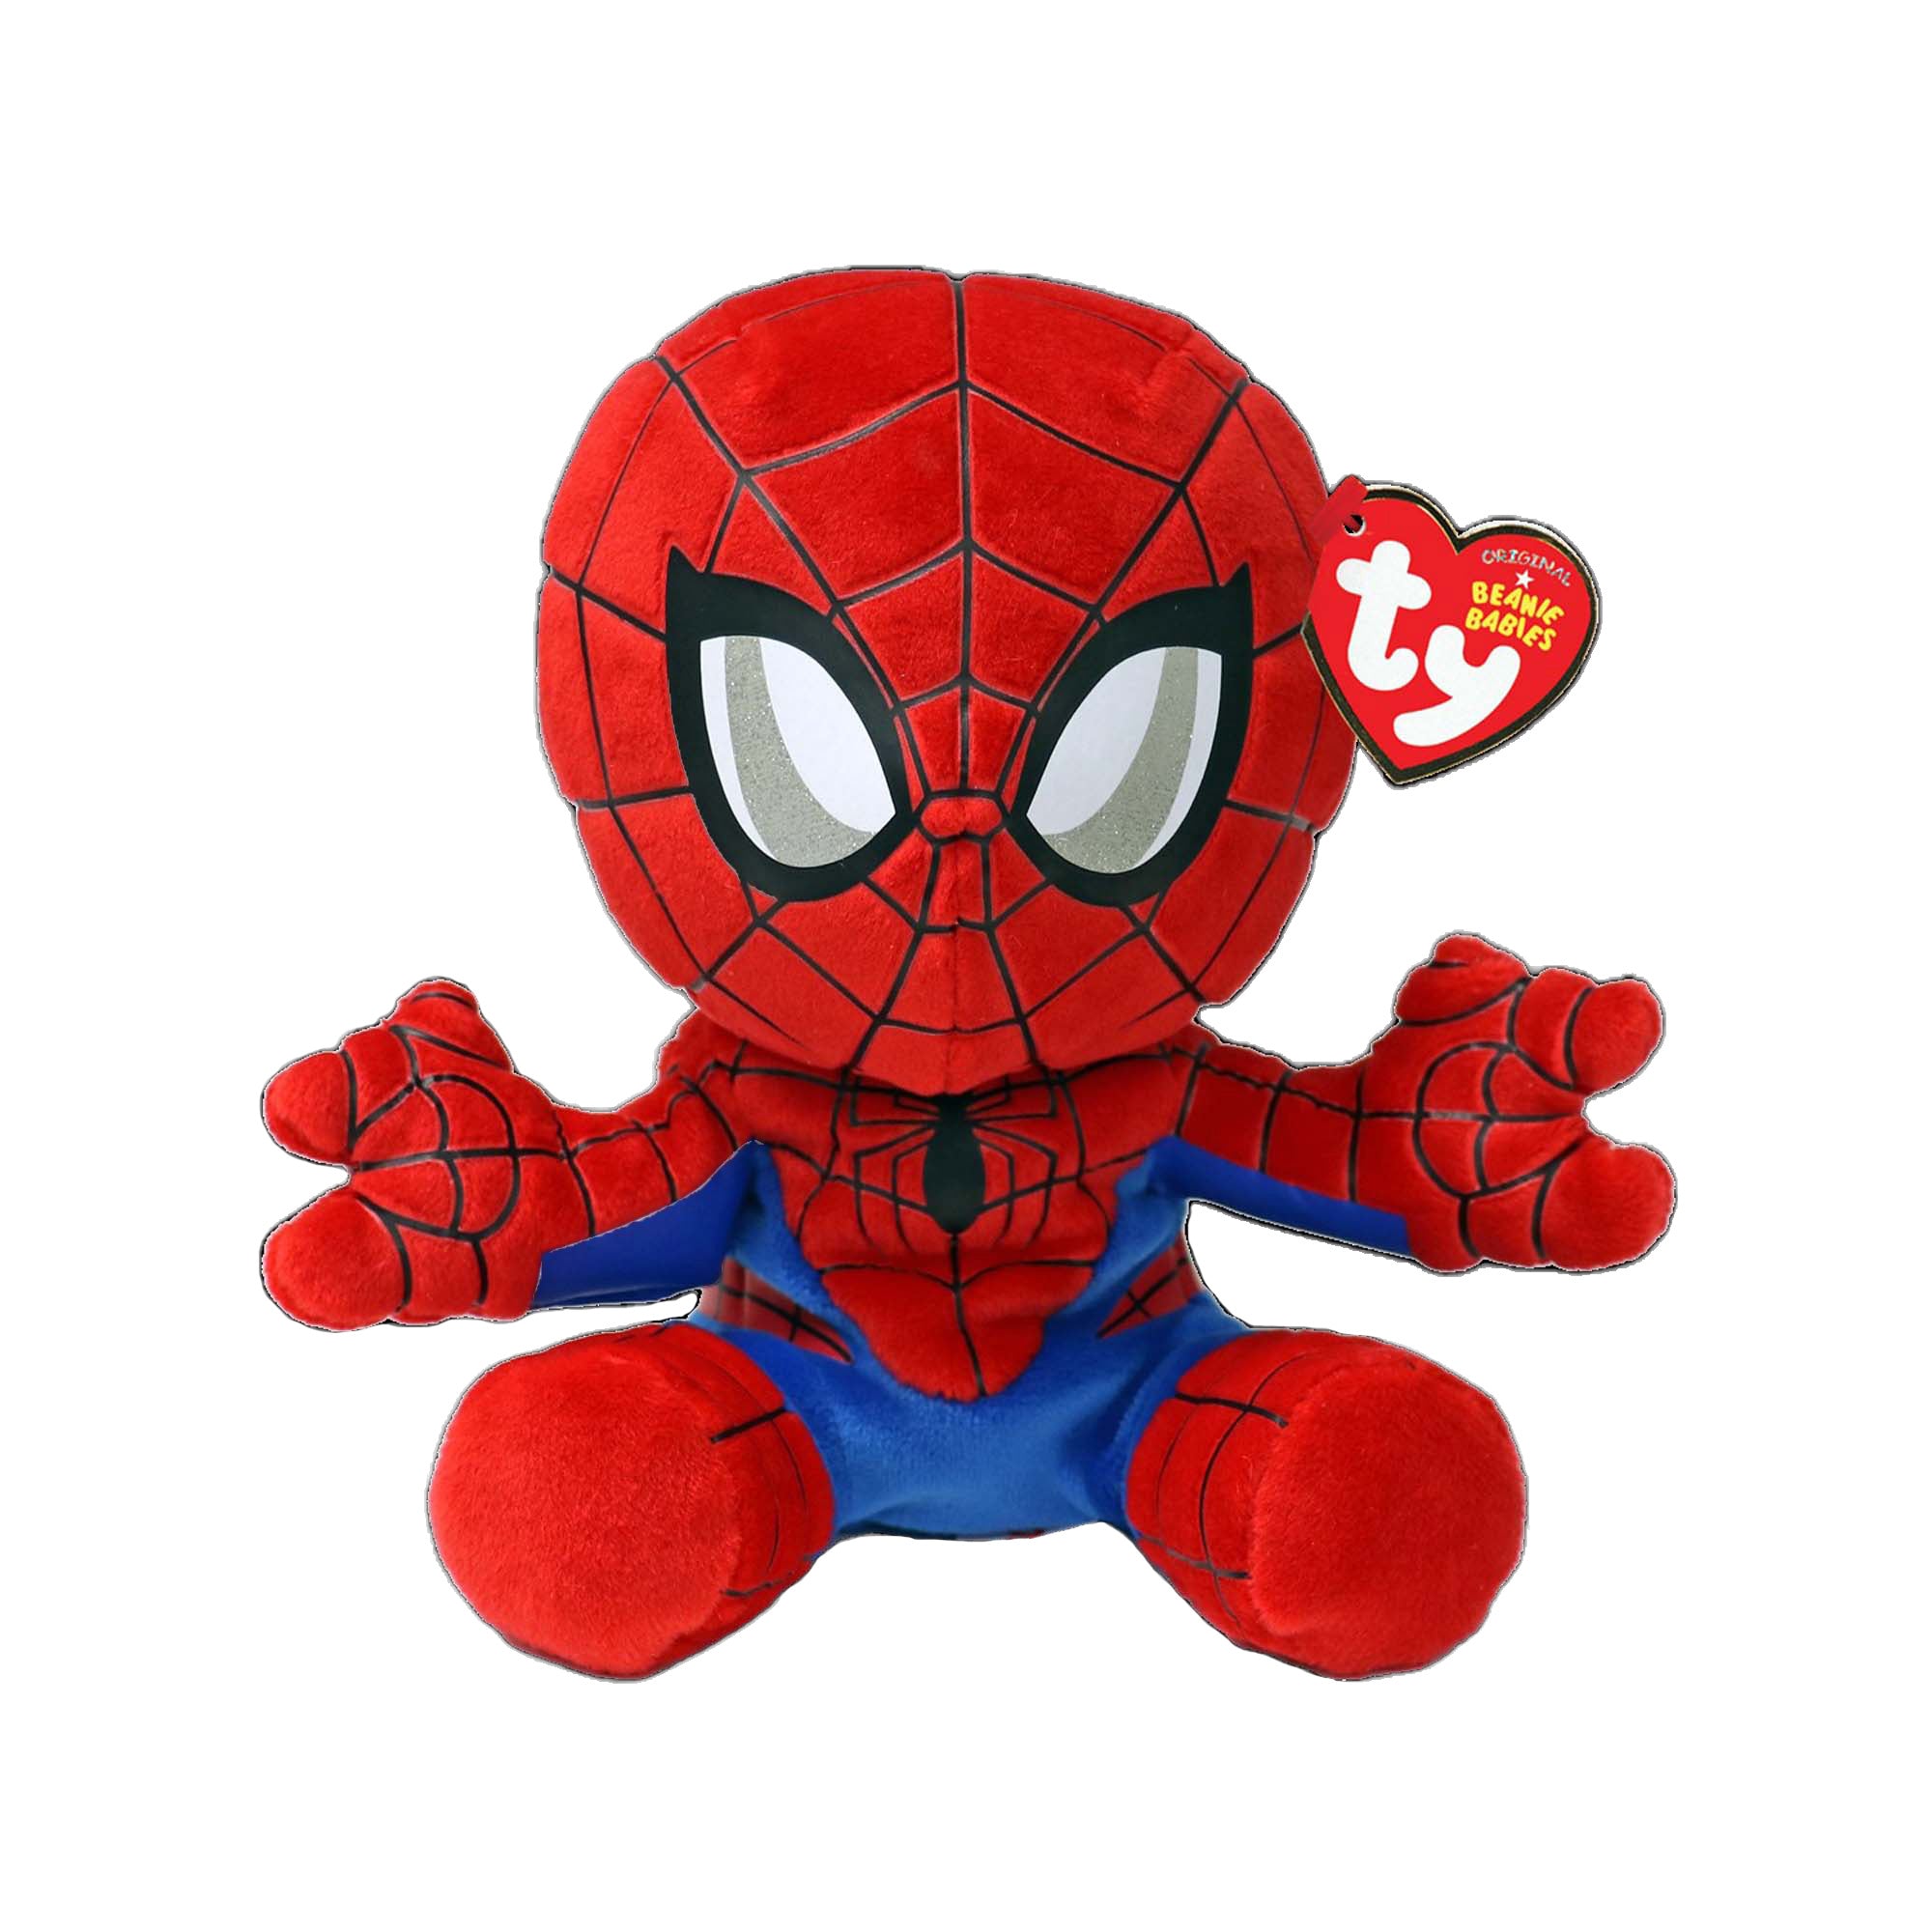 TY Marvel Soft Plush, Spider-Man, 8 Inches, 1 Count